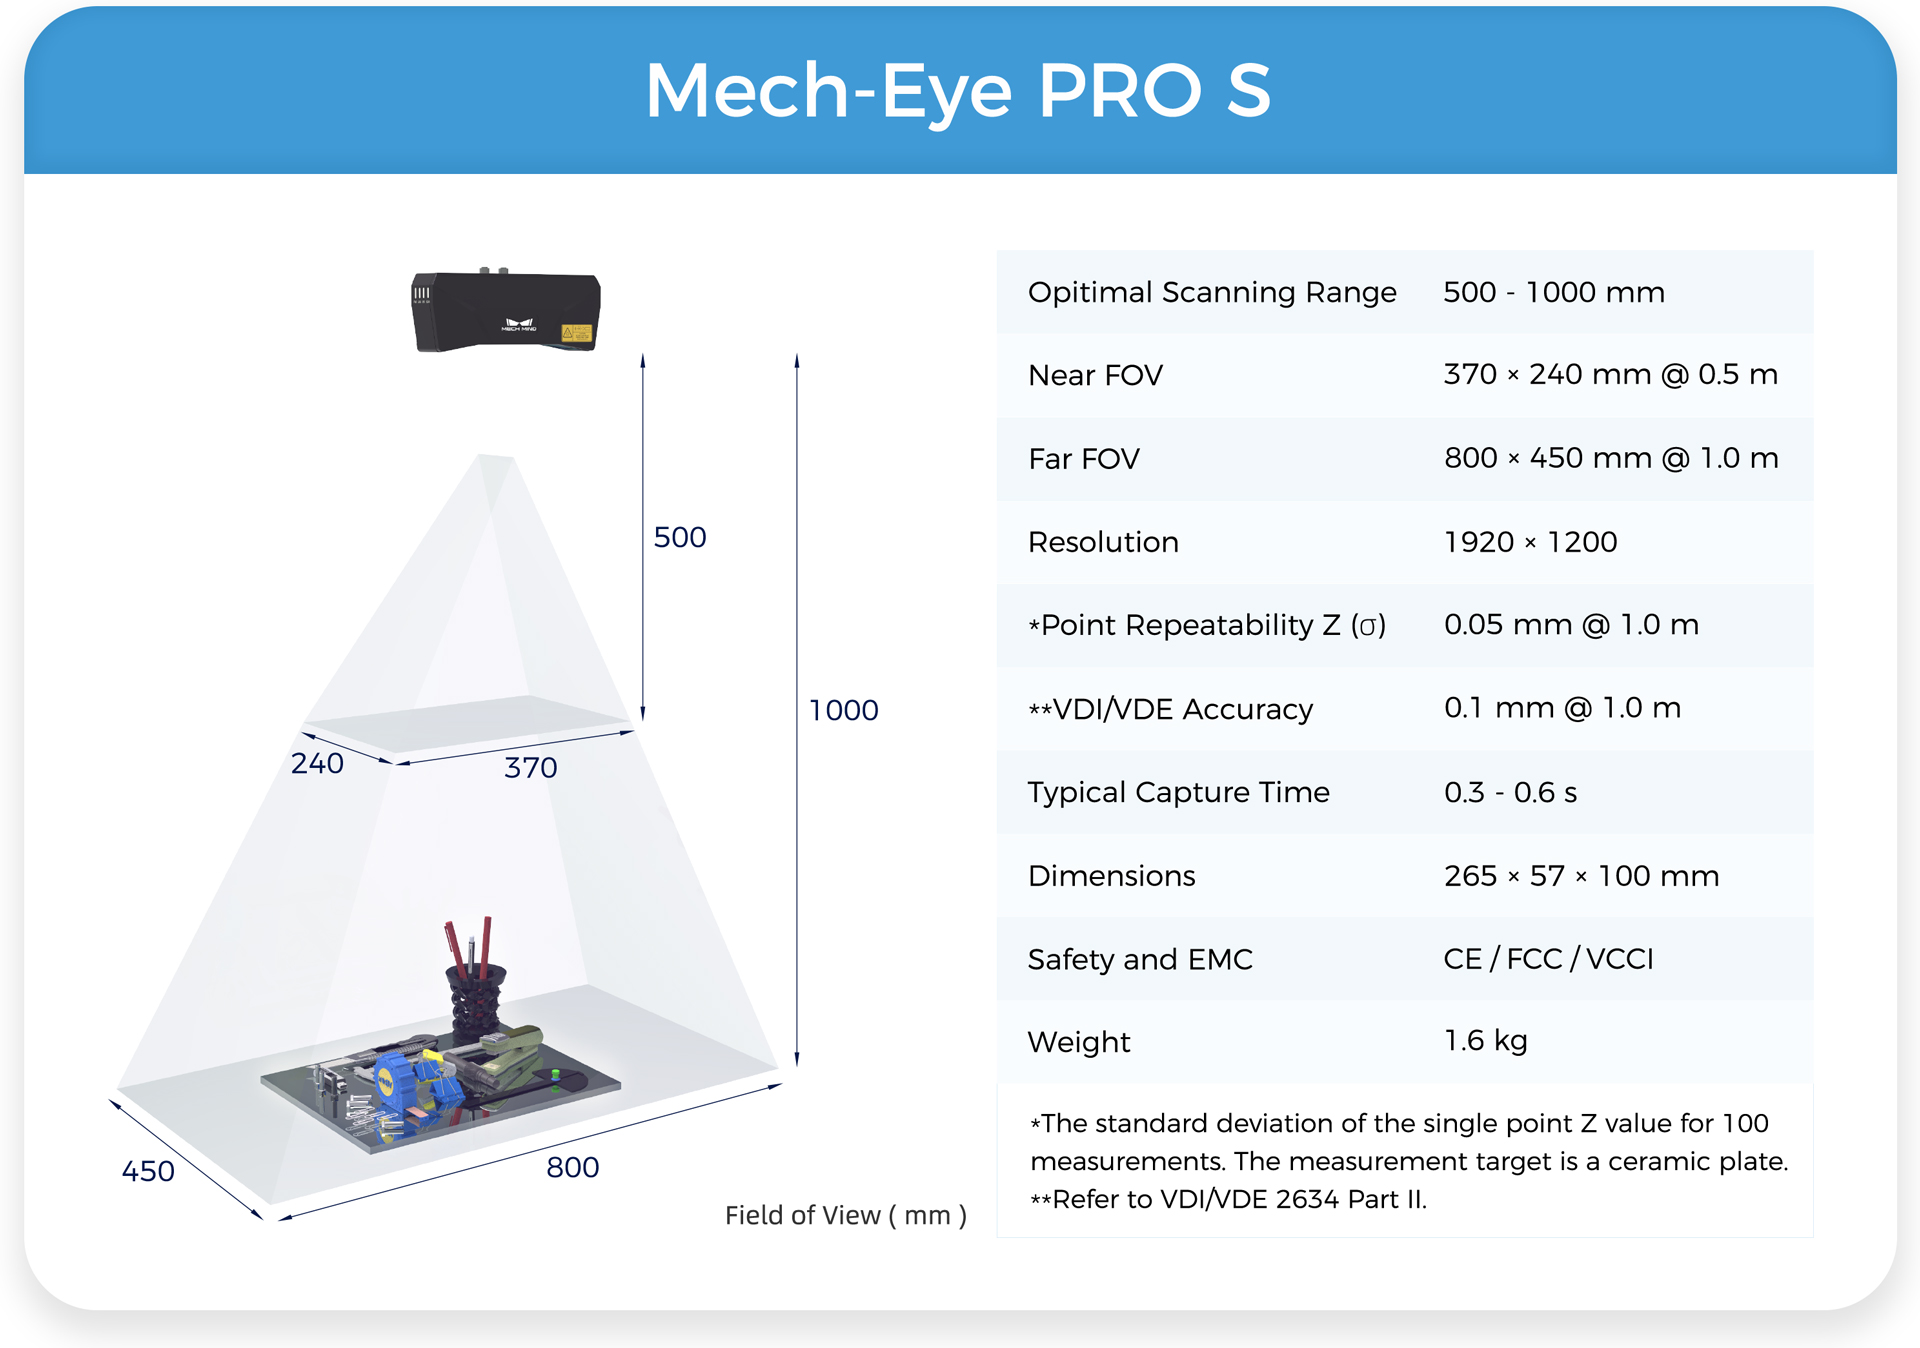 Mech-Mind Introduces 4th Generation Mech-Eye PRO Industrial 3D Camera for Medium-Range Working Distances Featuring High Accuracy and Fast Scanning 